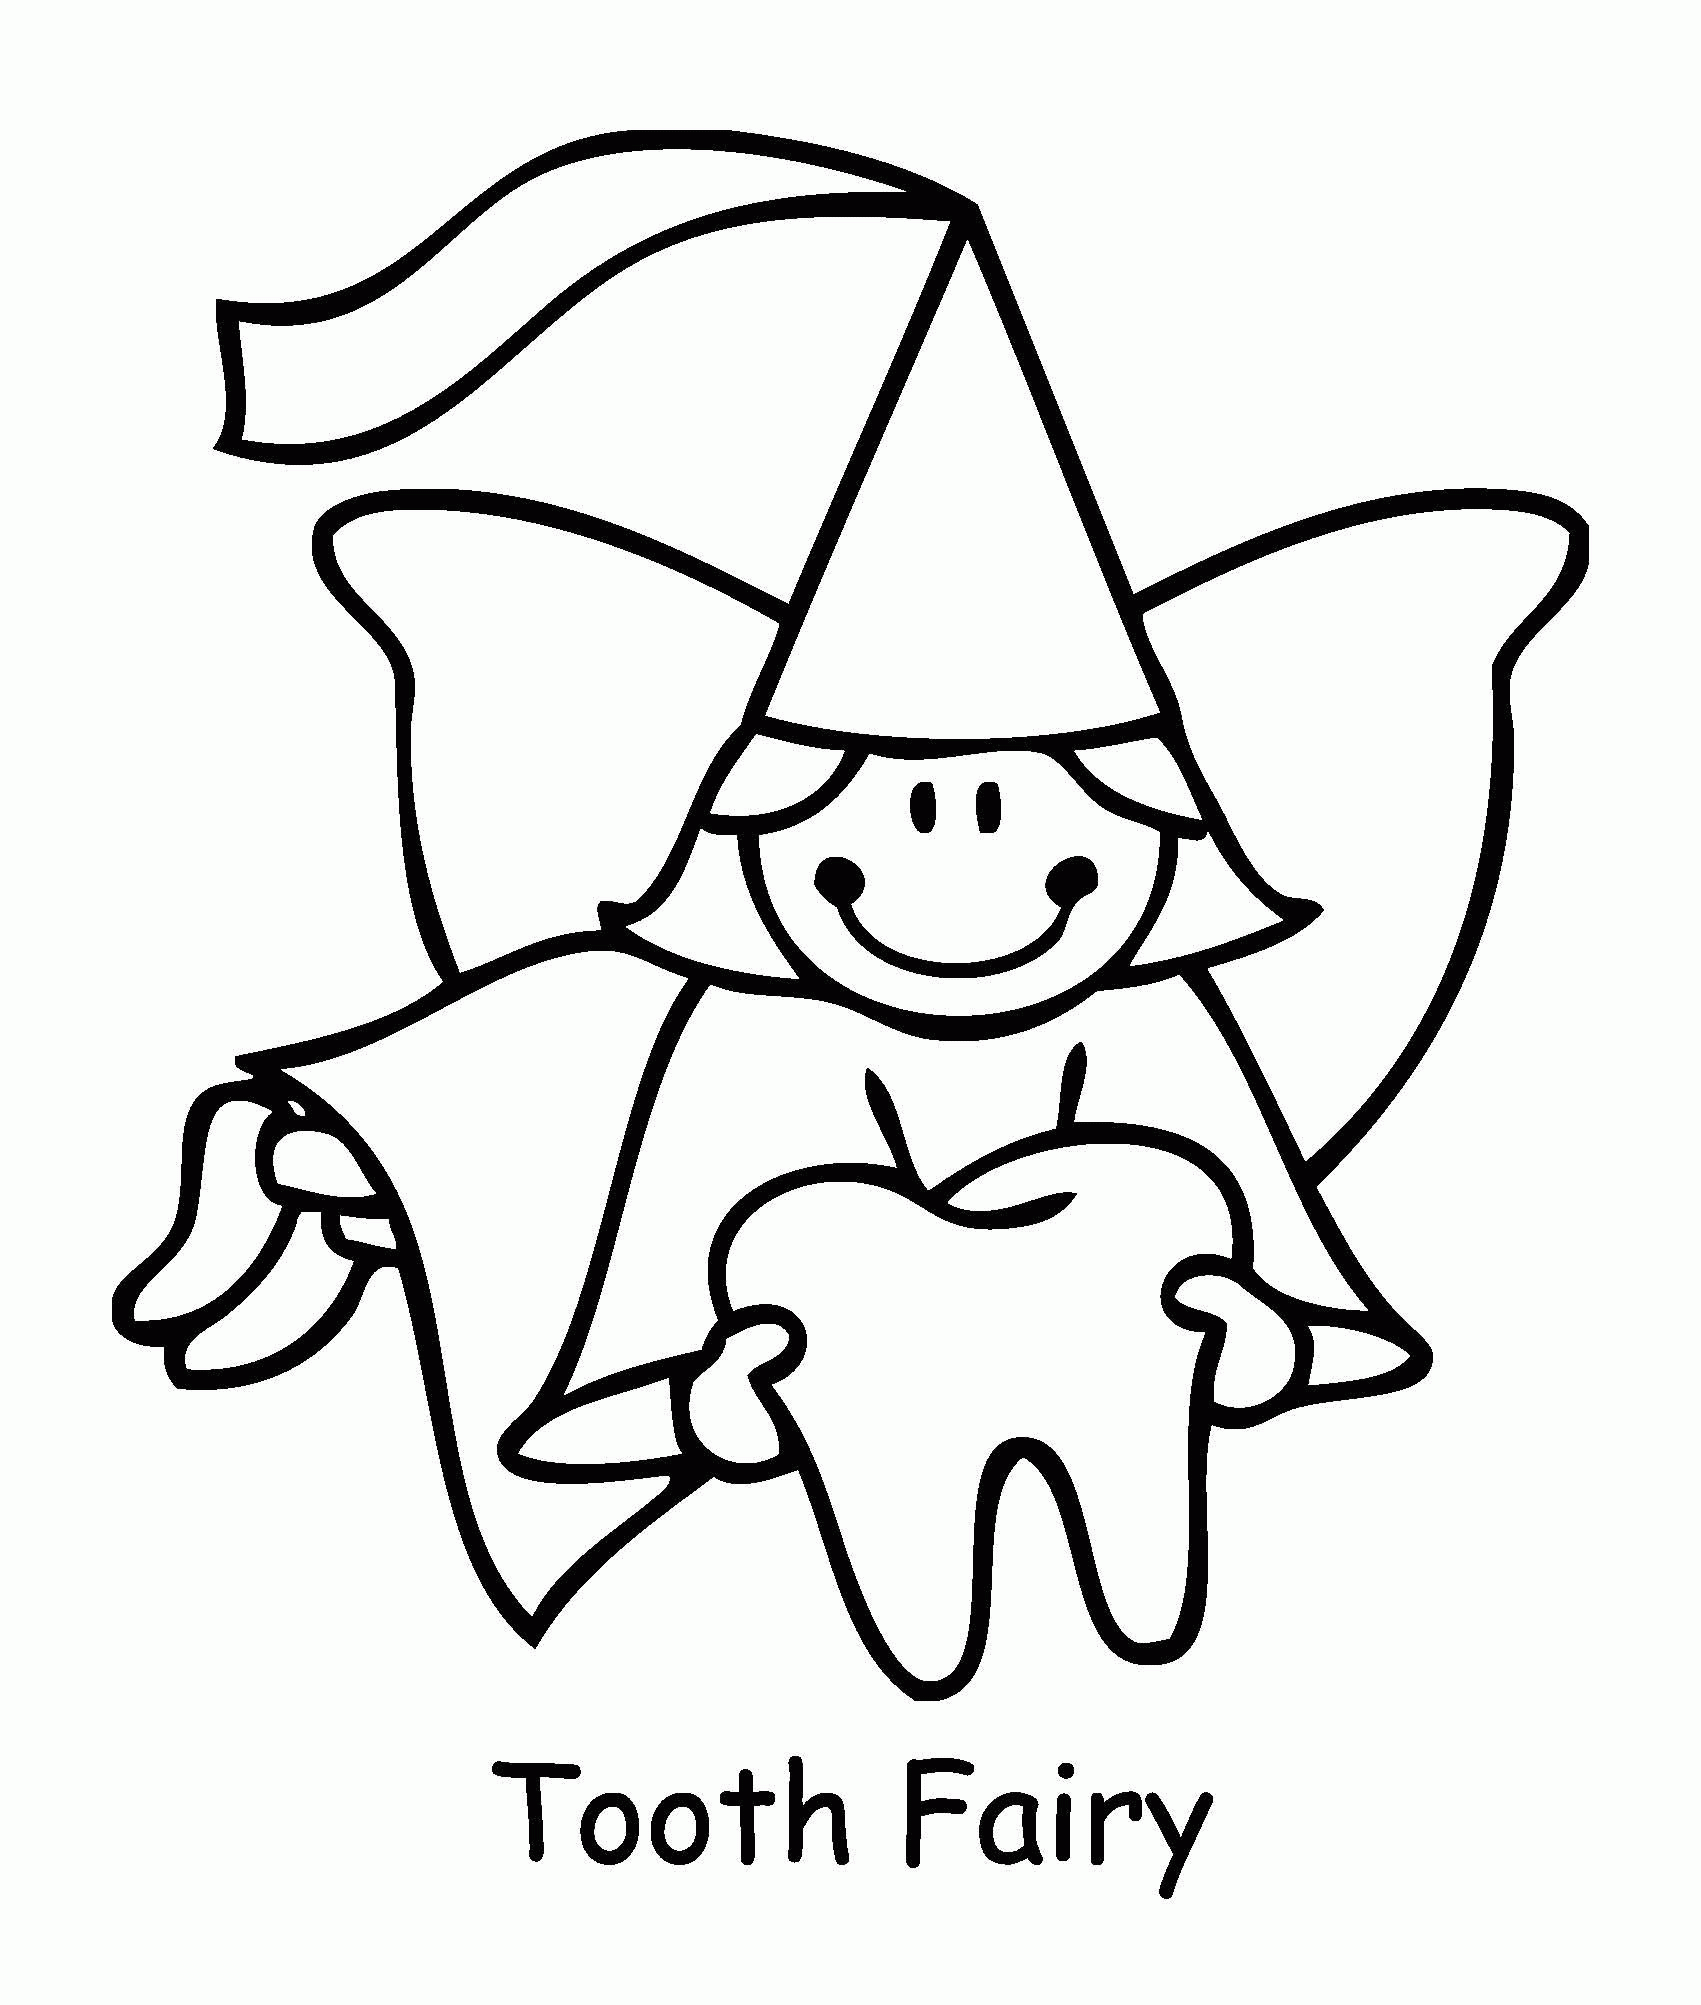 Dental Coloring Pages For Preschool Tooth Coloring Sheets Tooth ...